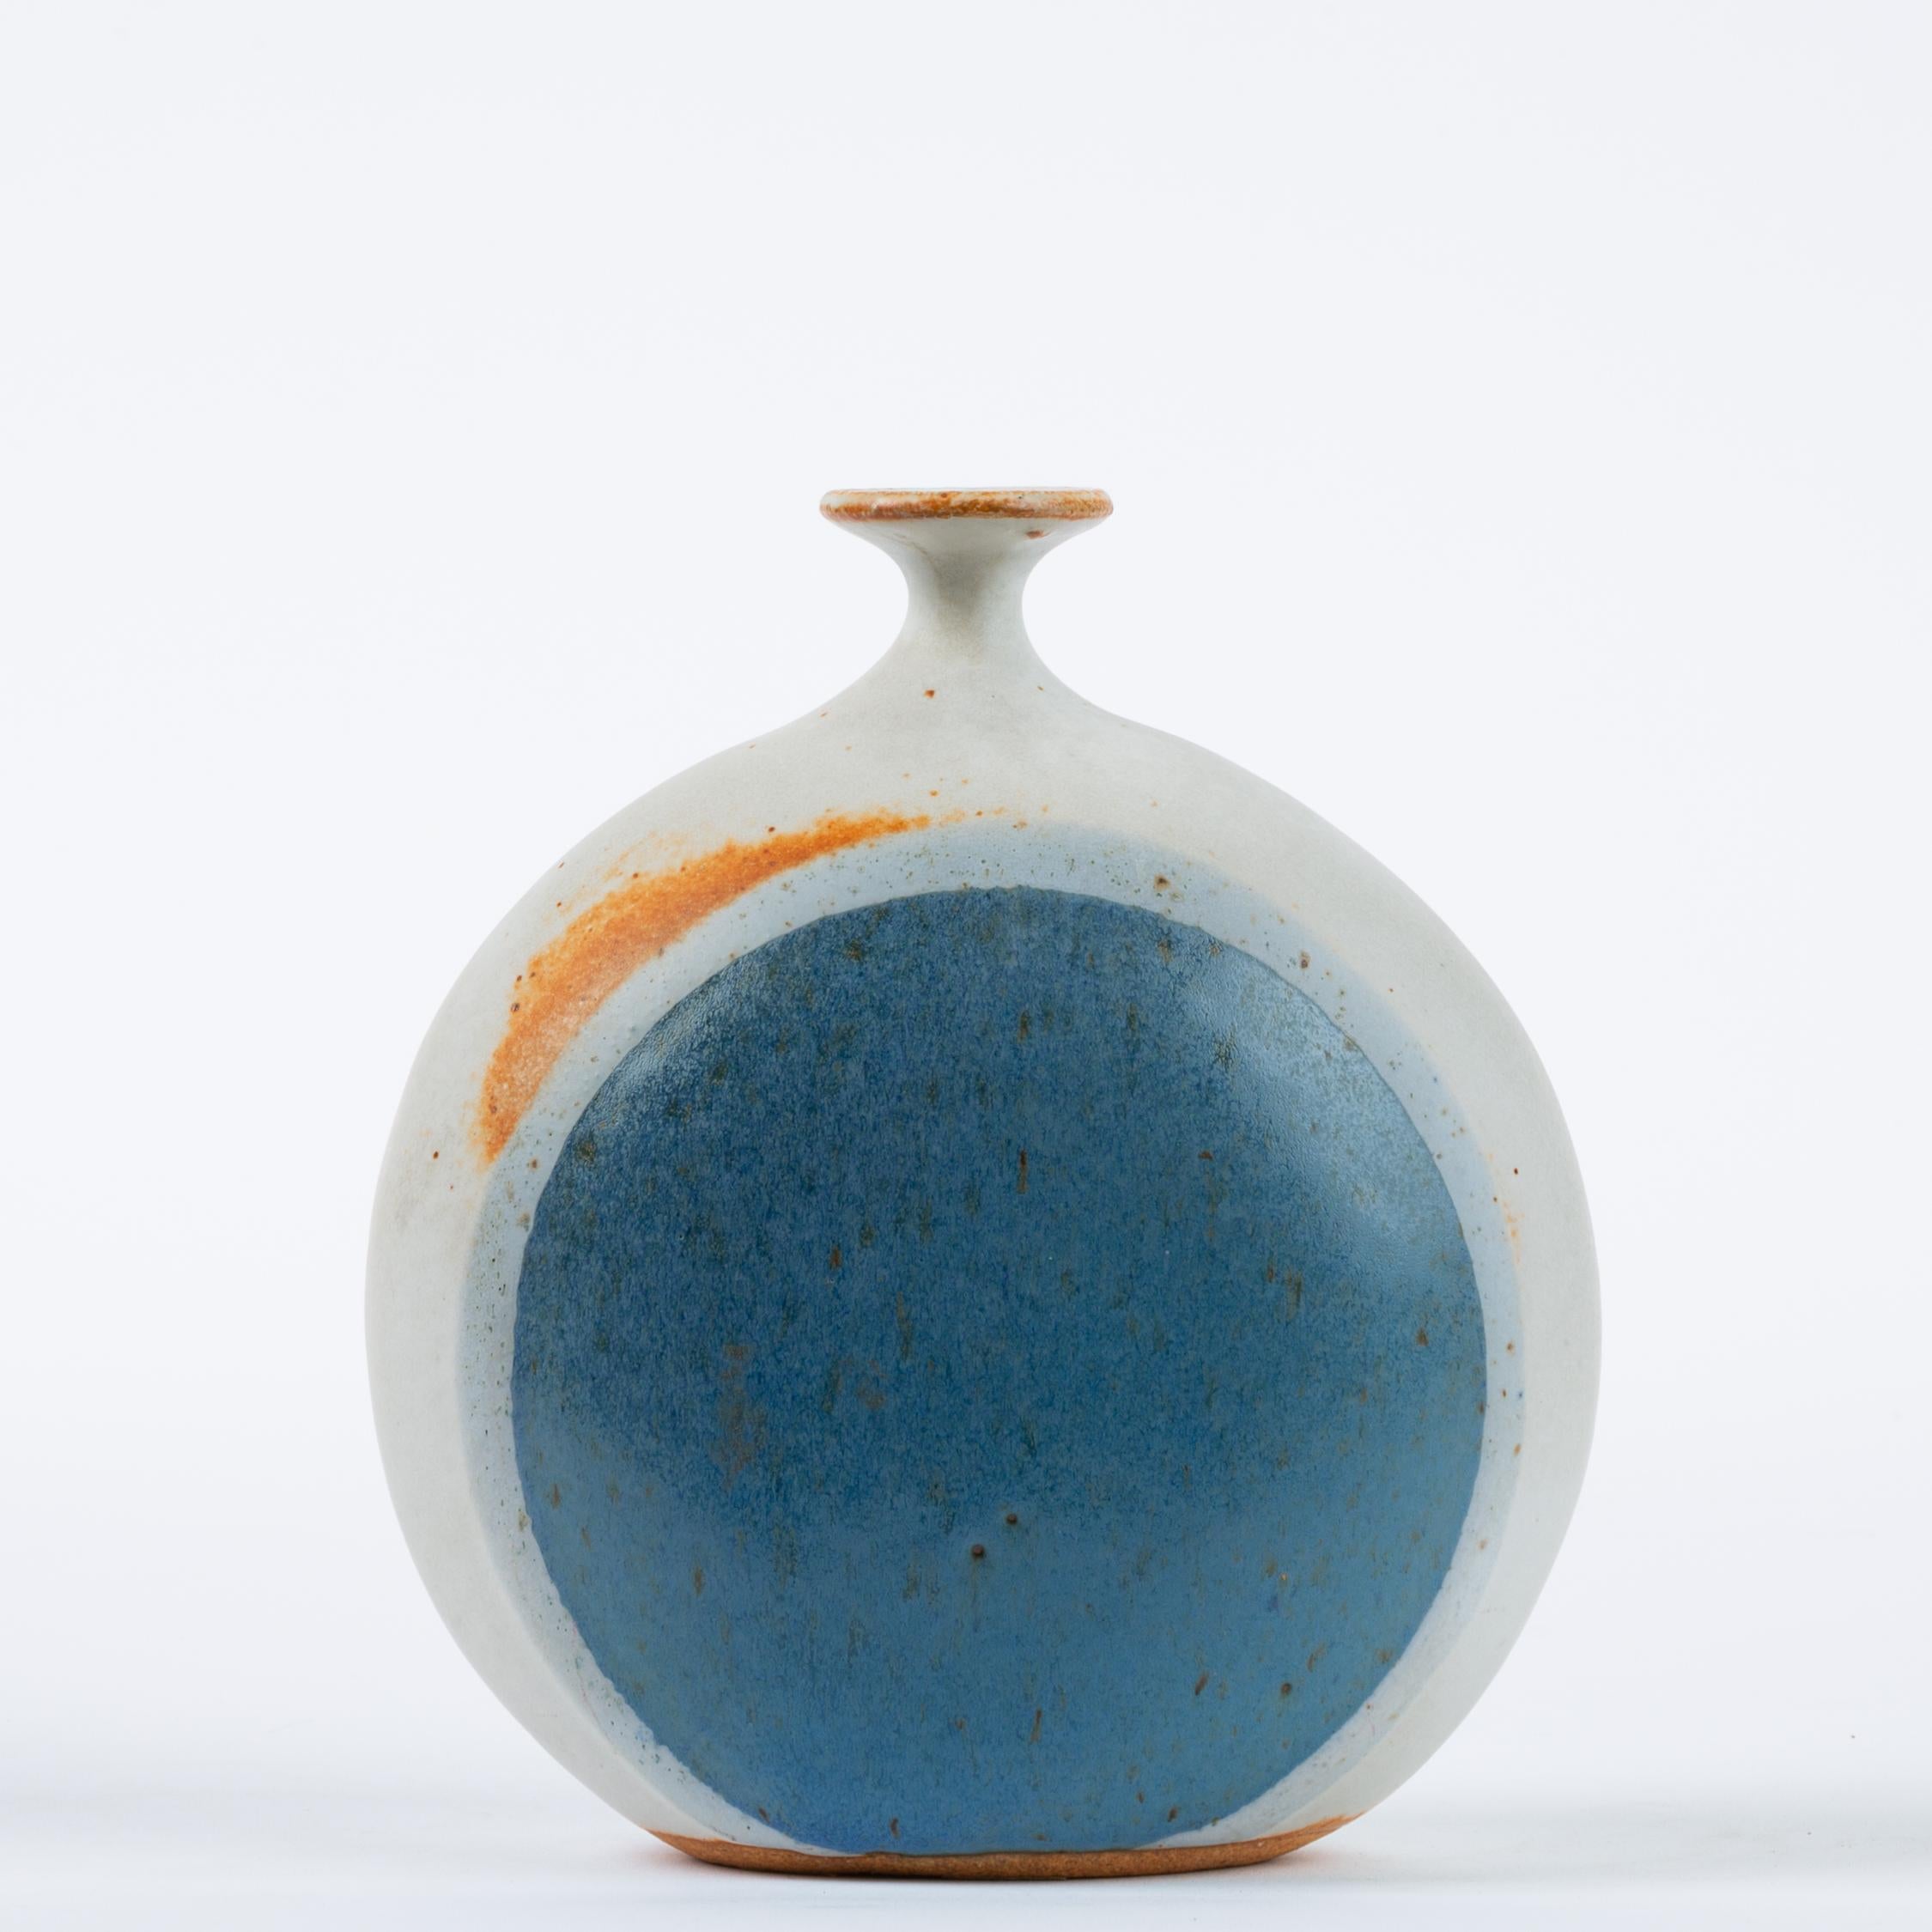 A popular design and characteristic glaze pattern from Hickory Grove Studio, a Pennsylvania-based ceramics venture by partners Isabel Parks and Warren Hullow. The small vessel has a flared lip and dainty neck on a wide-hipped body. Each side of the